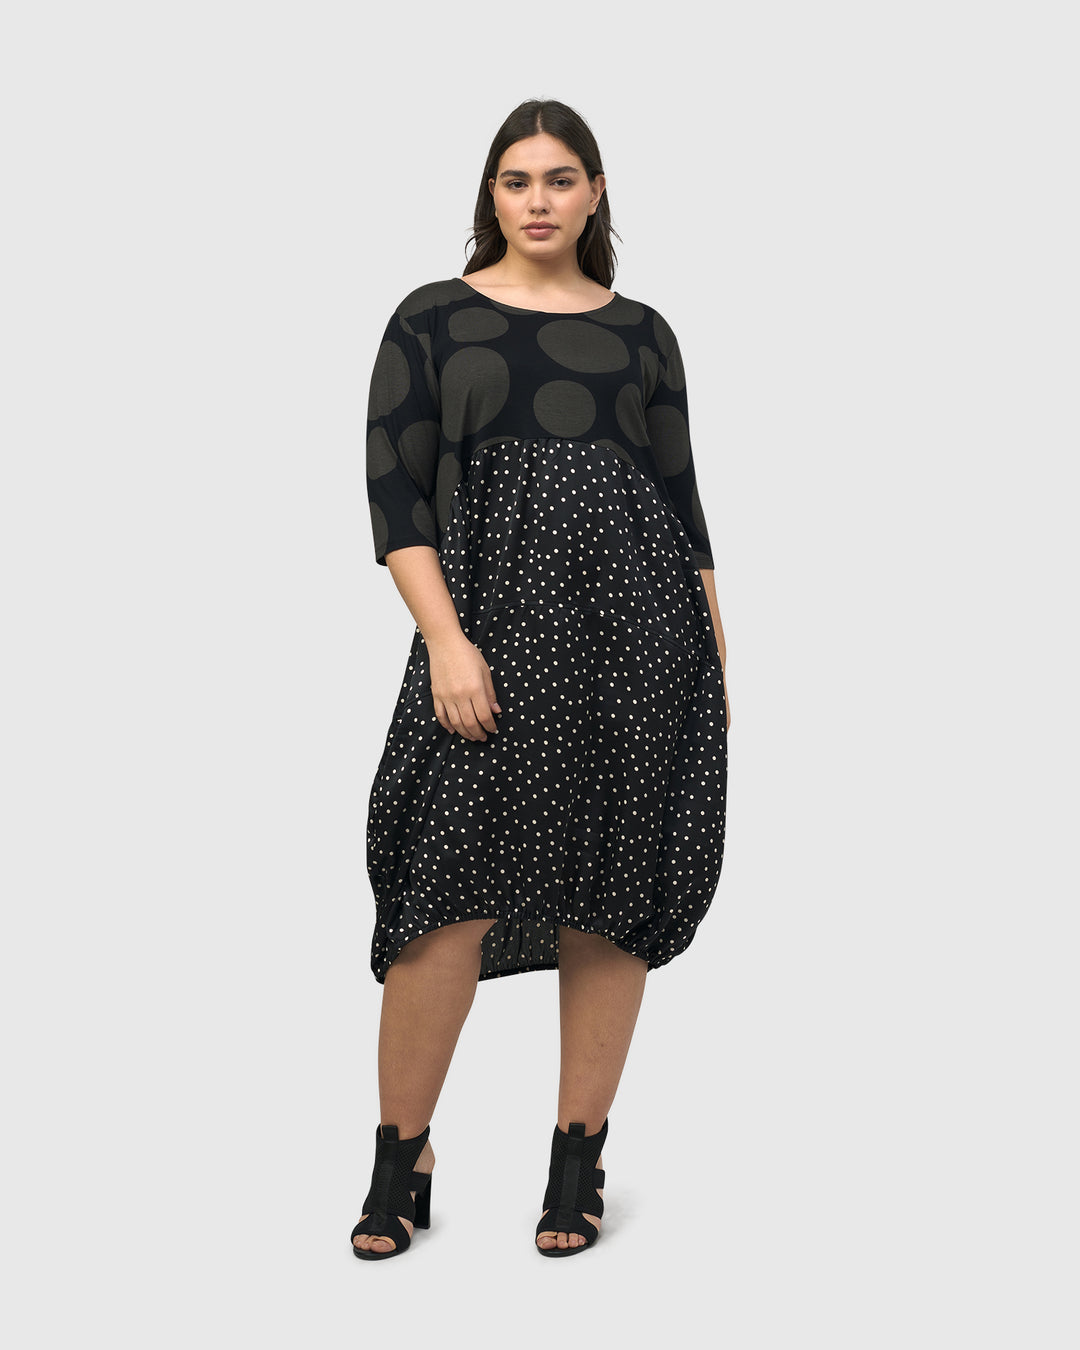 Lima Relaxed Dress, Mix